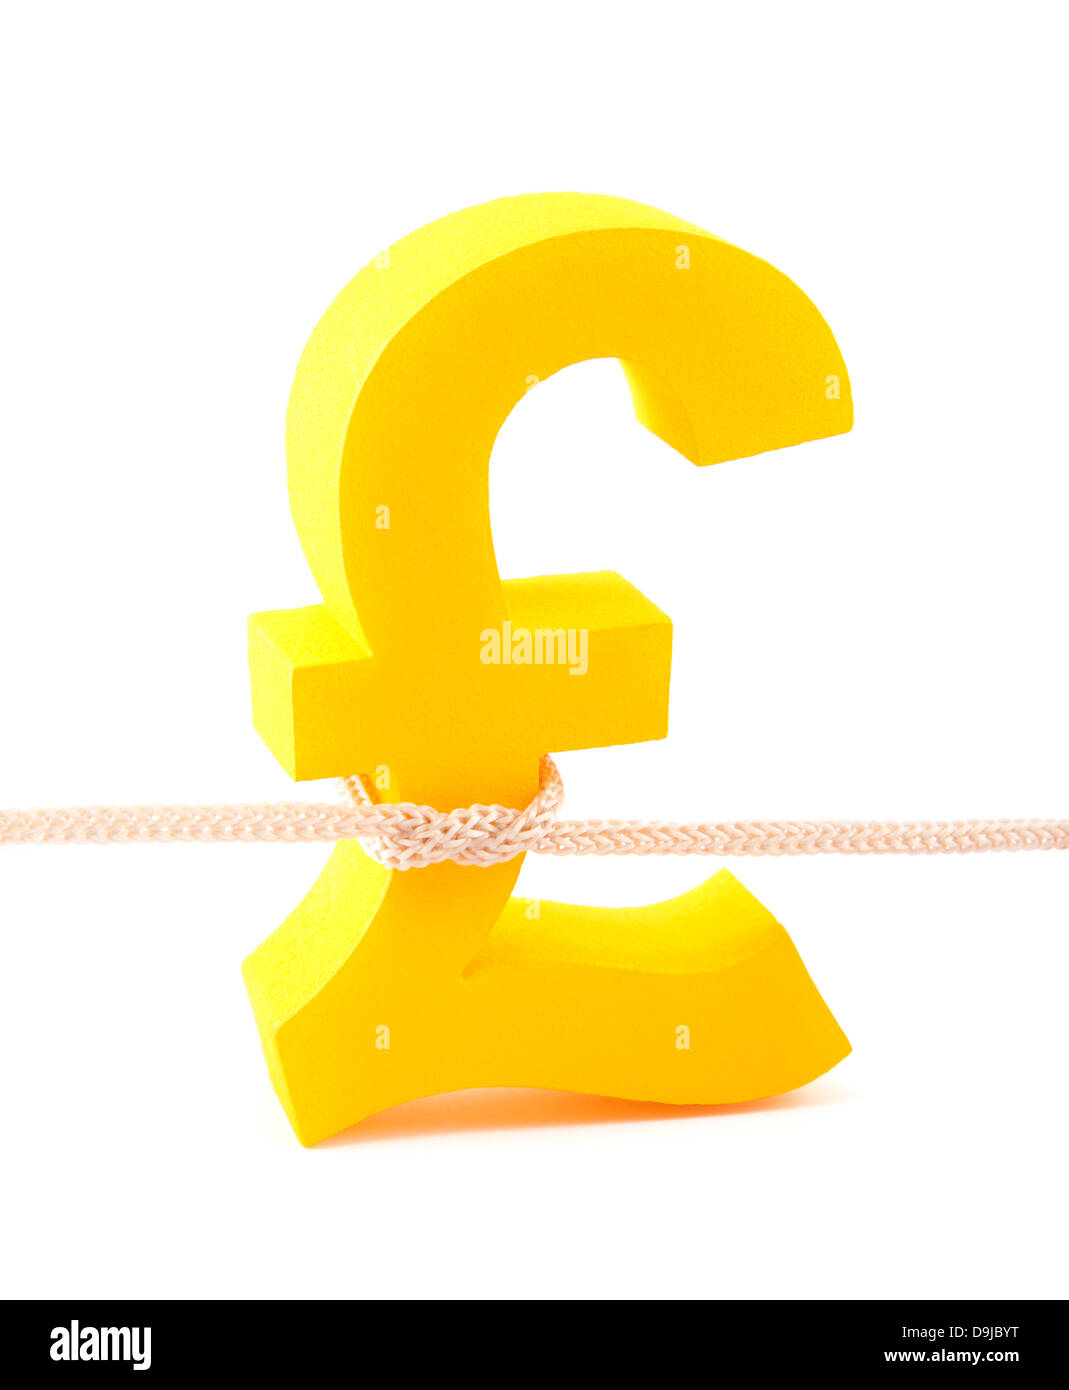 Golden pound symbol tied with rope Stock Photo